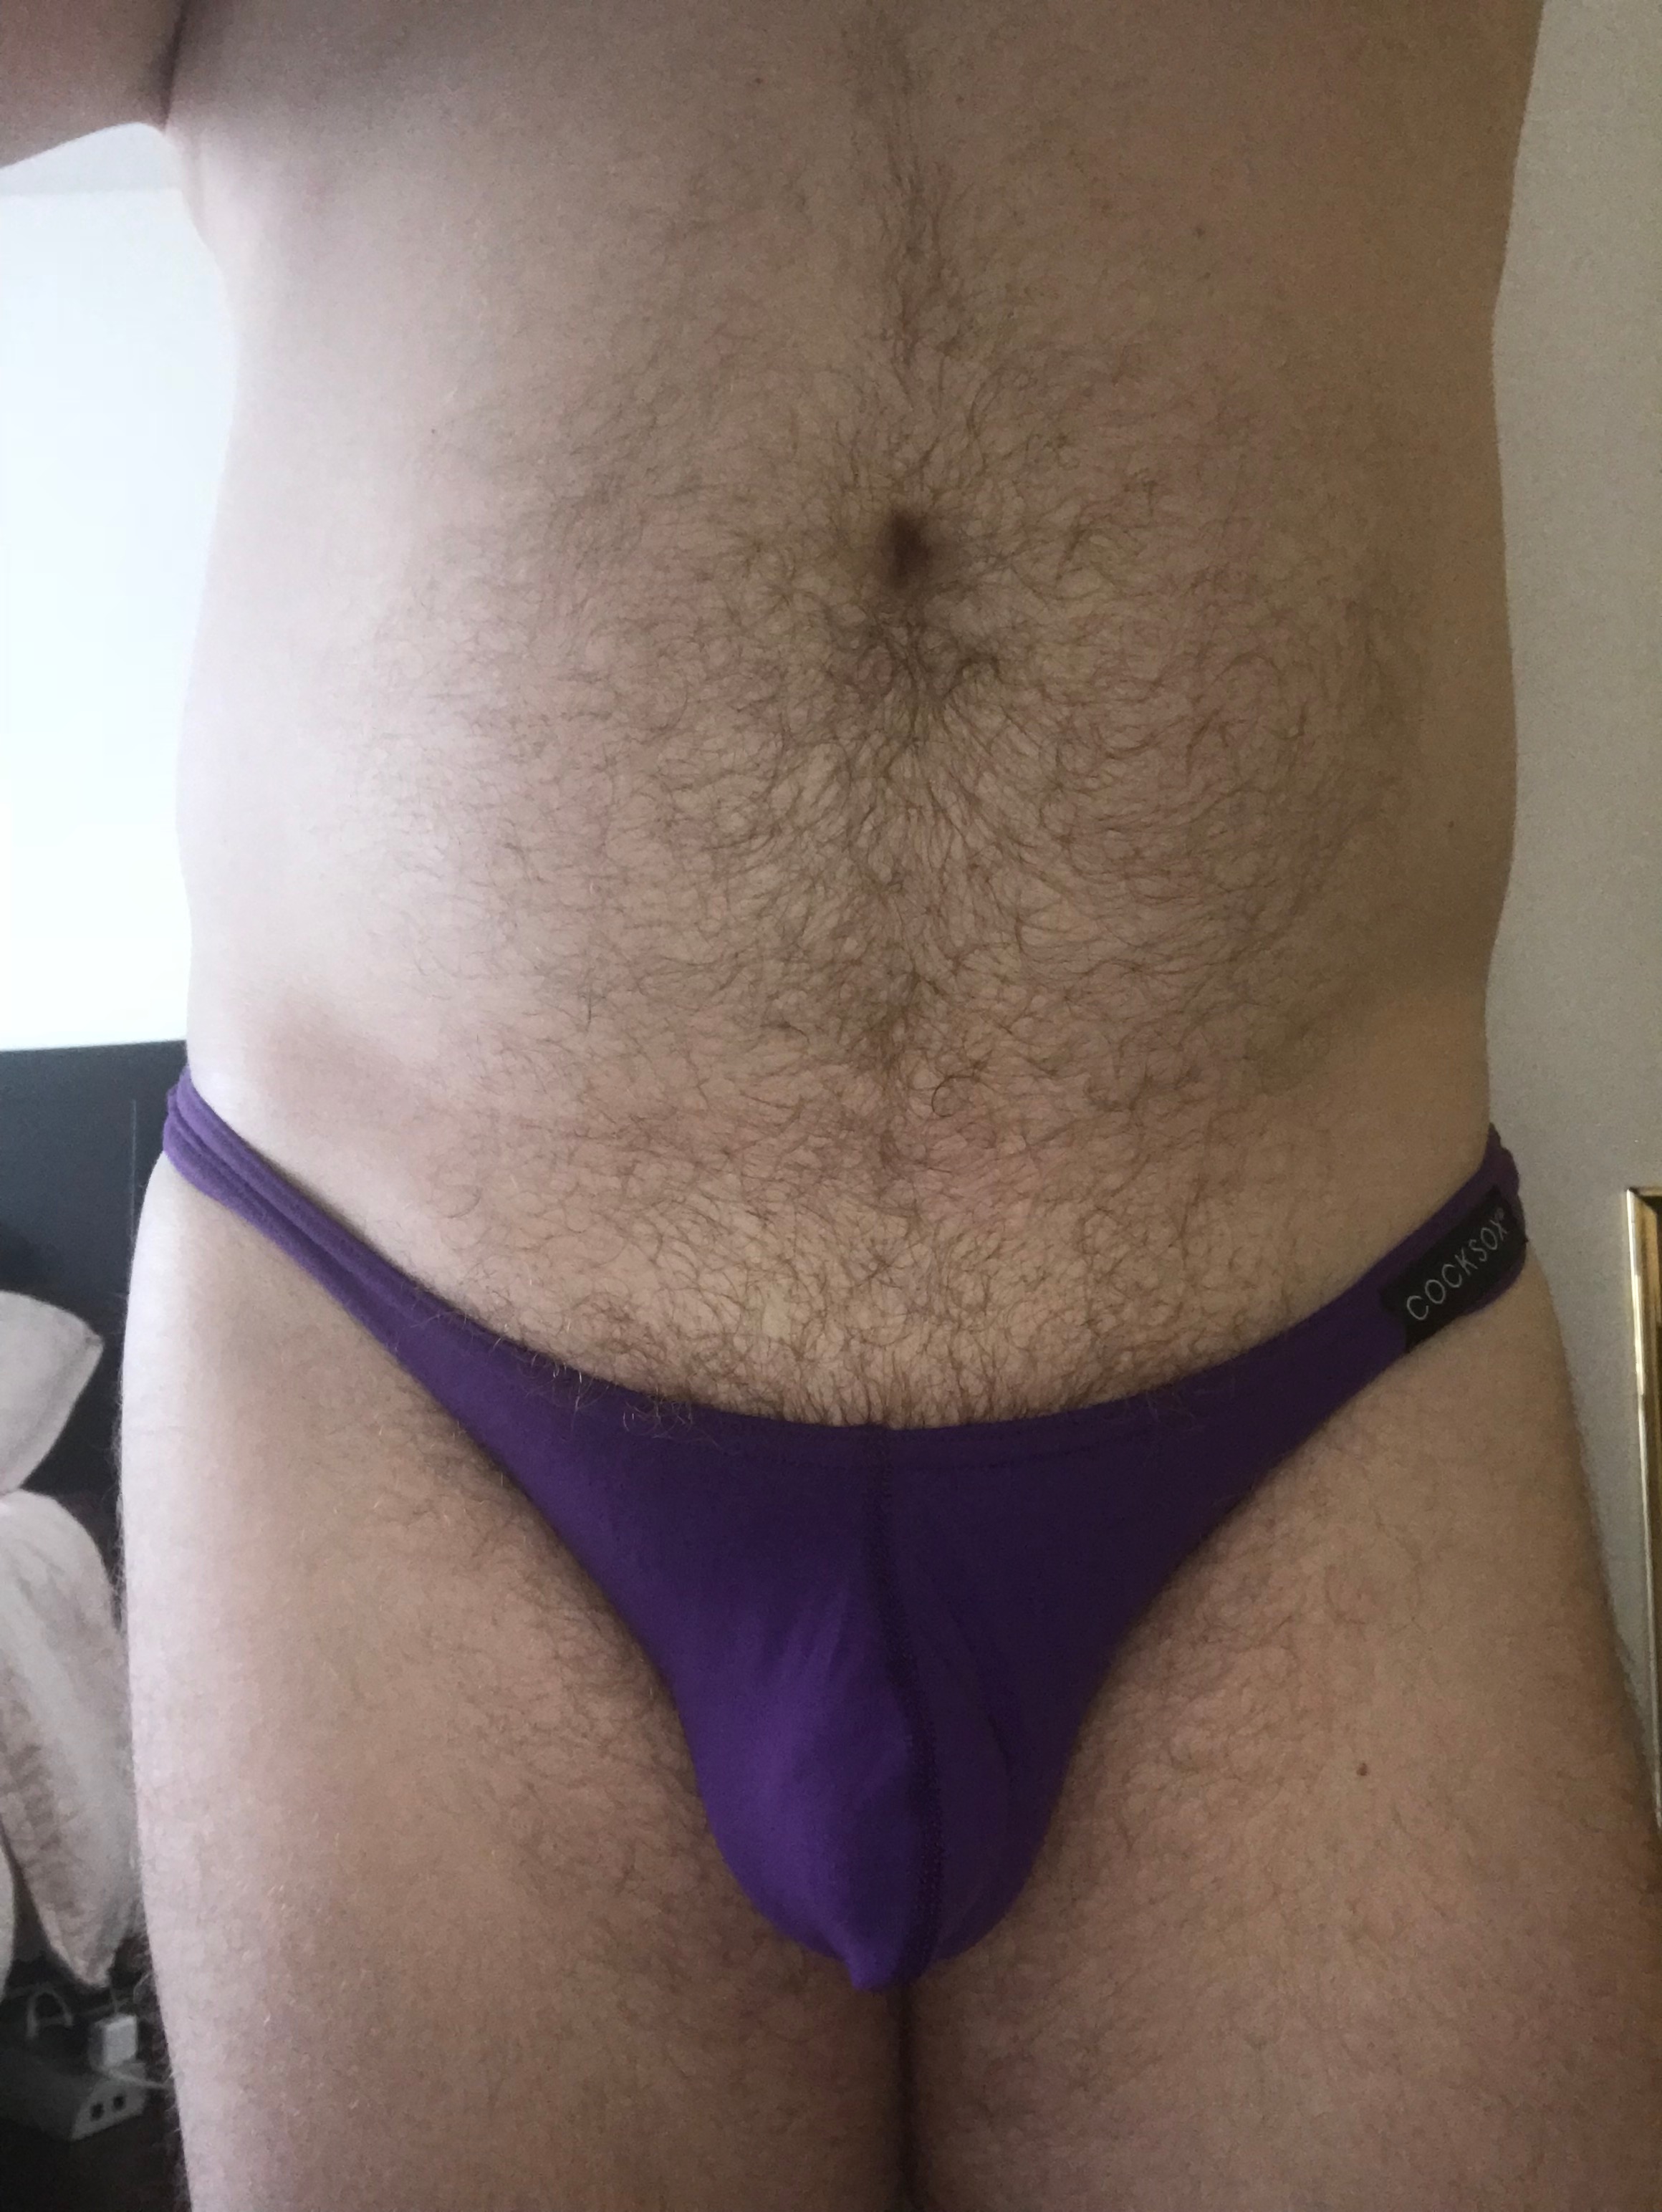 Cocksox thong in bright purple today…